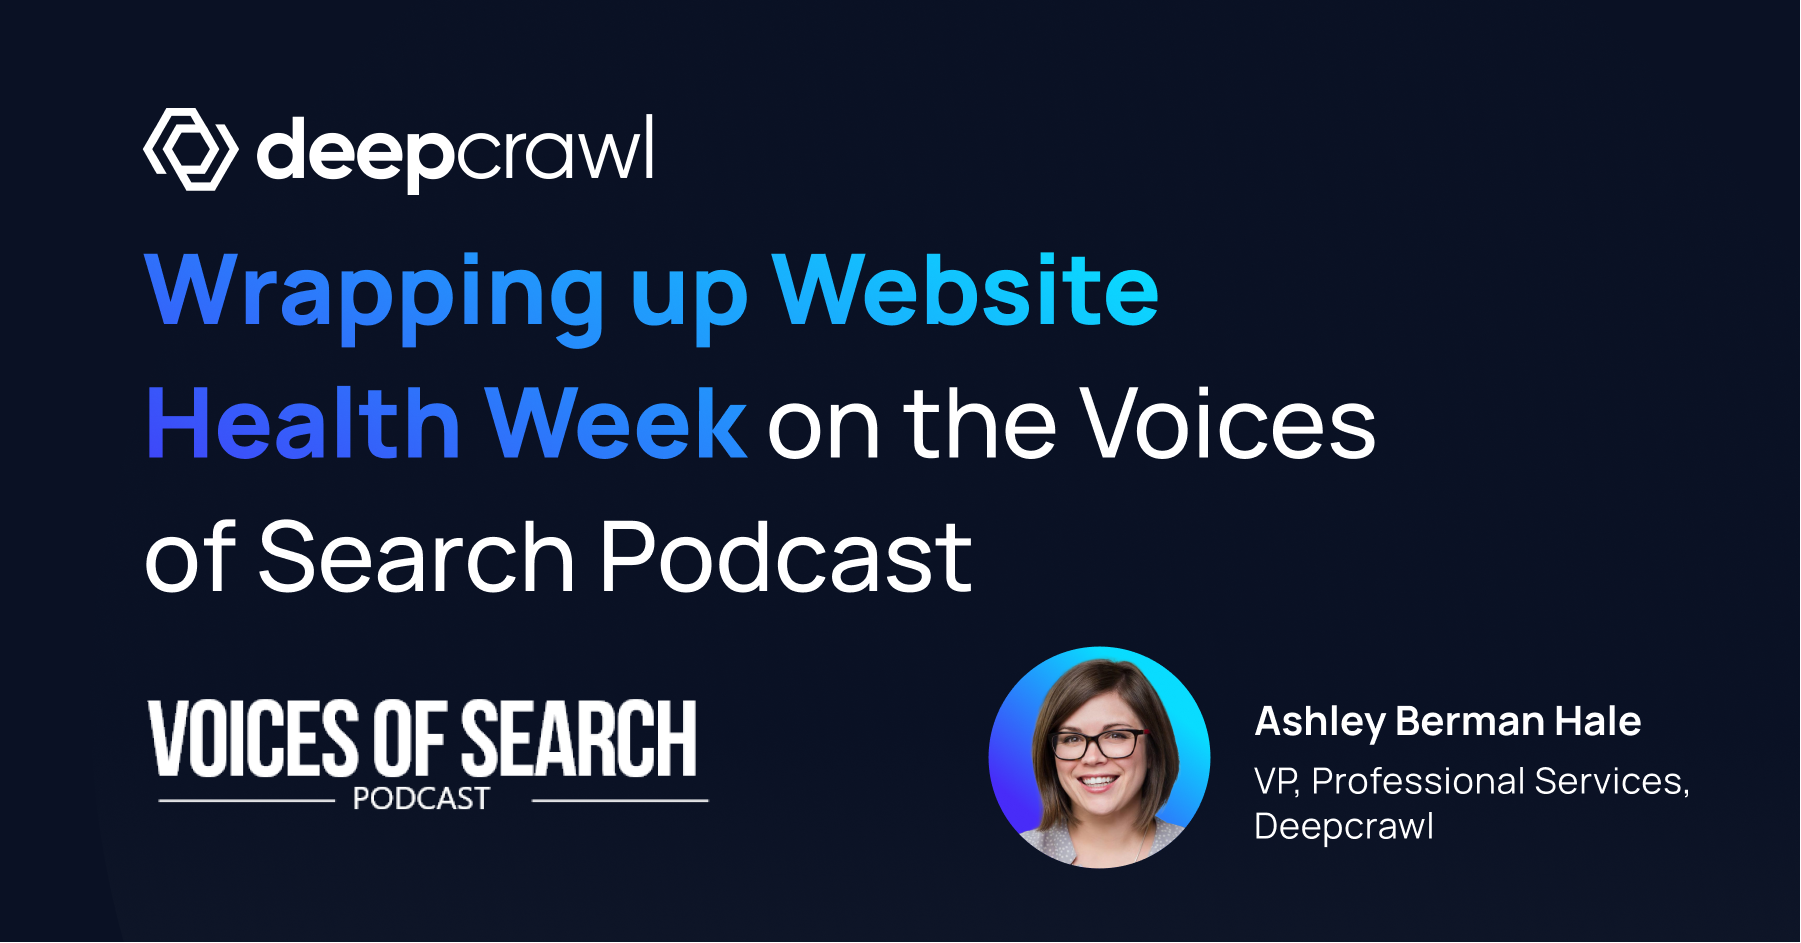 Ashley Berman Hale, Deepcrawl VP of Professional Services, wraps up a week of website health podcast episodes on the Voices of Search podcast